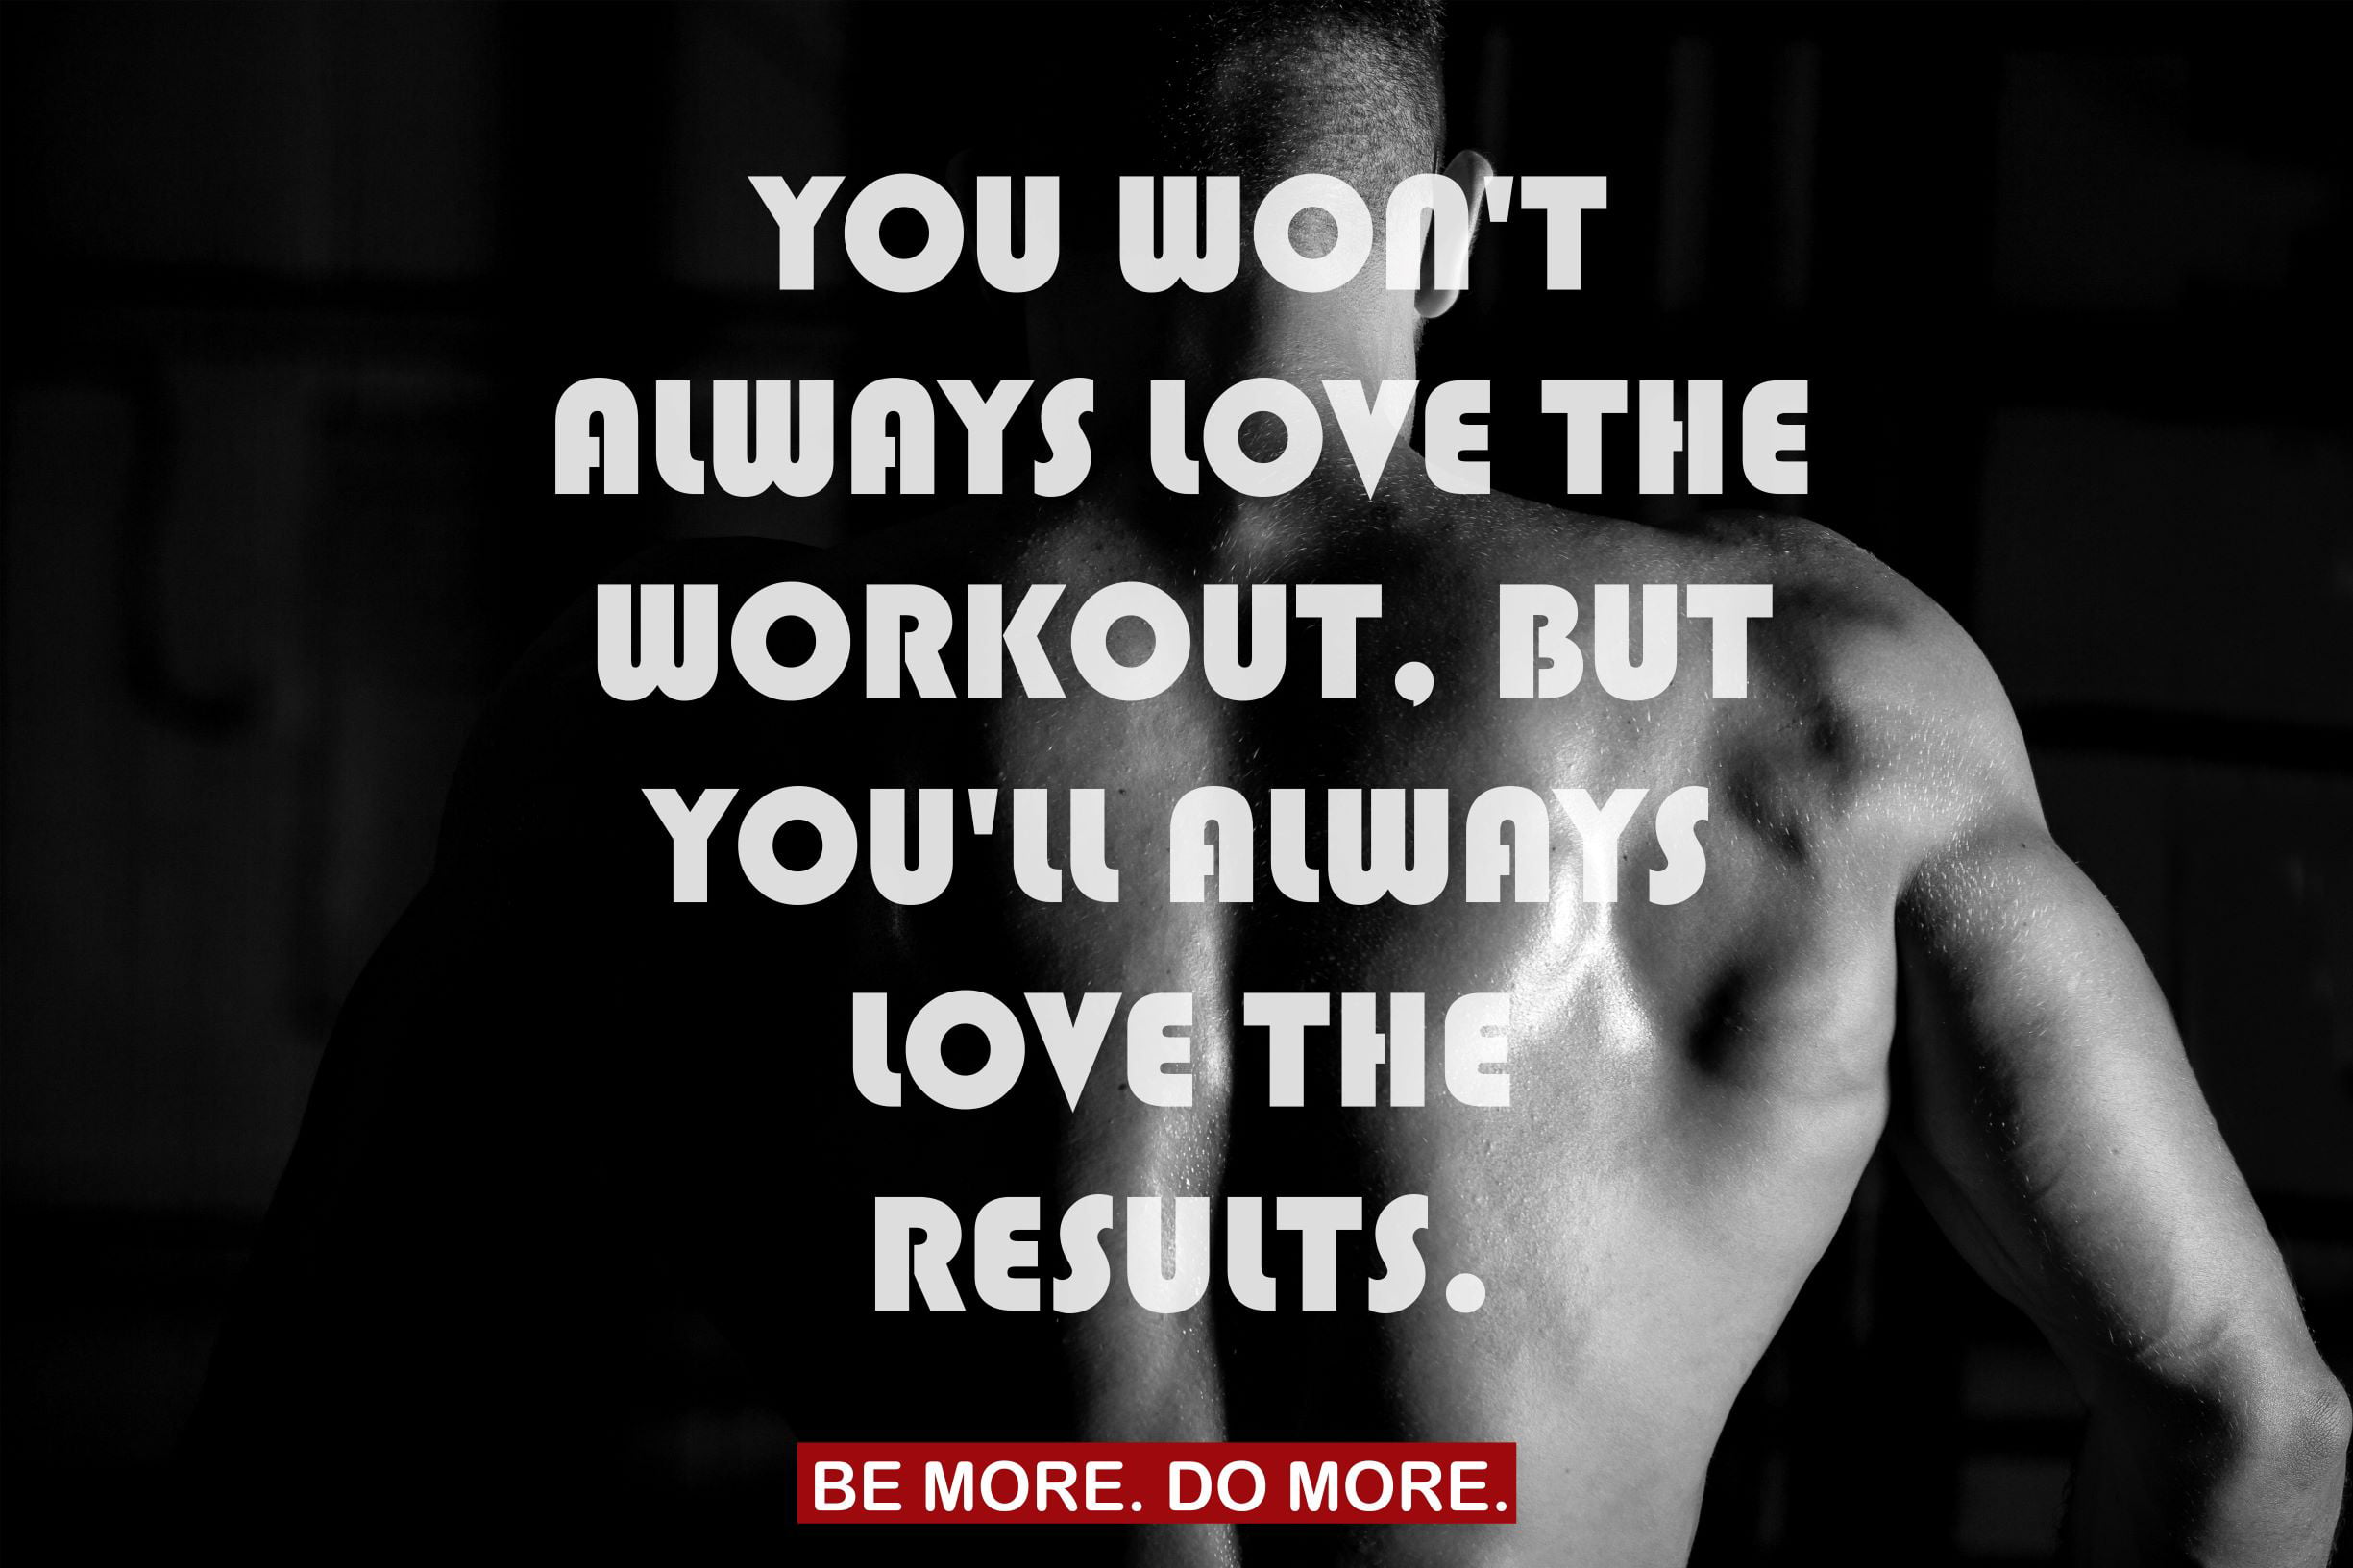 GYM FITNESS MOTIVATION WORKOUT quote positive poster picture print wall art